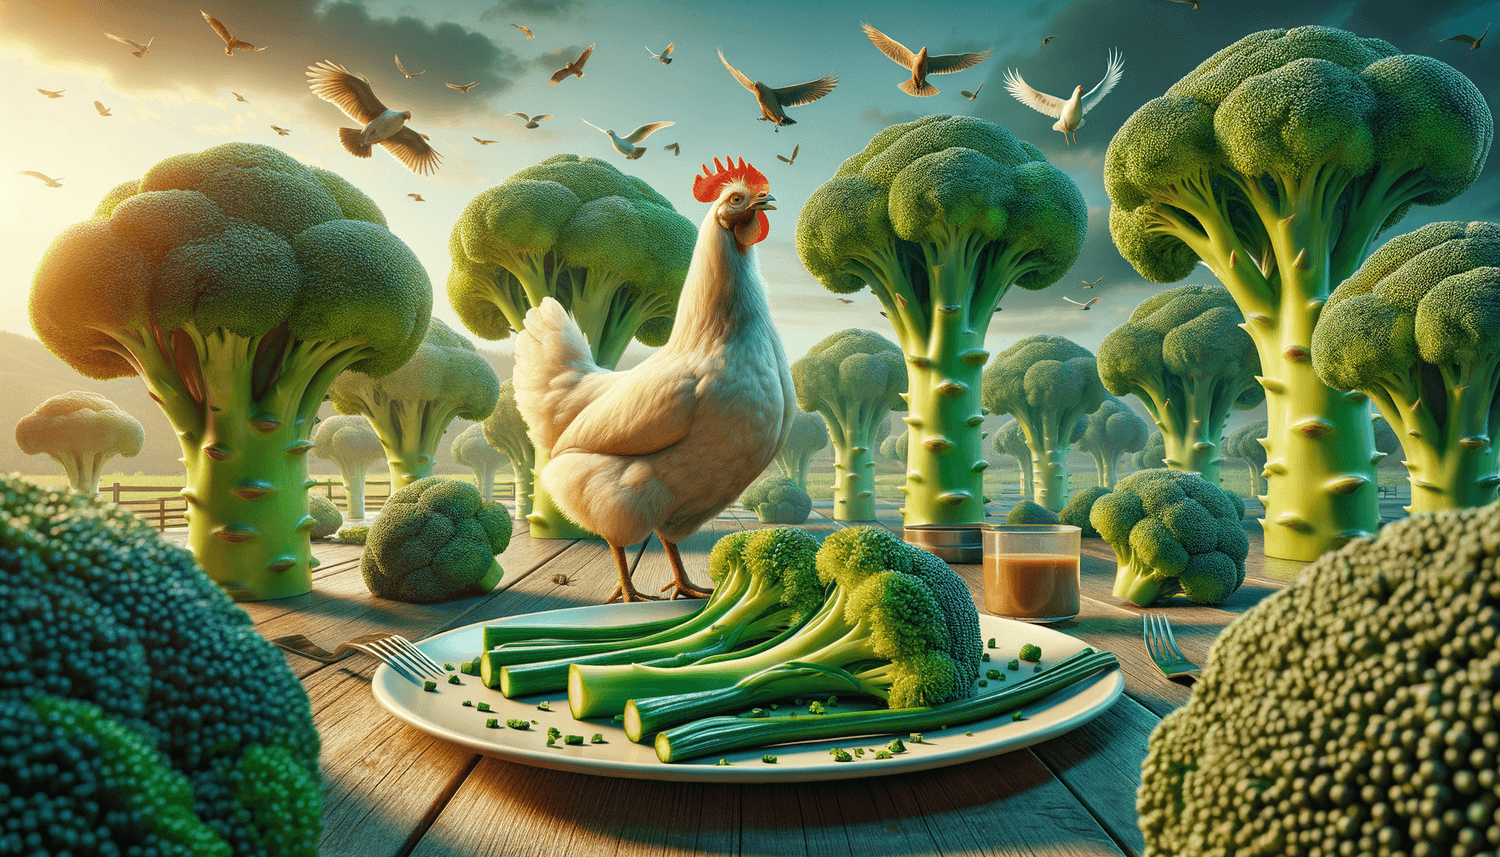 Can Chickens Eat Broccoli Stems?